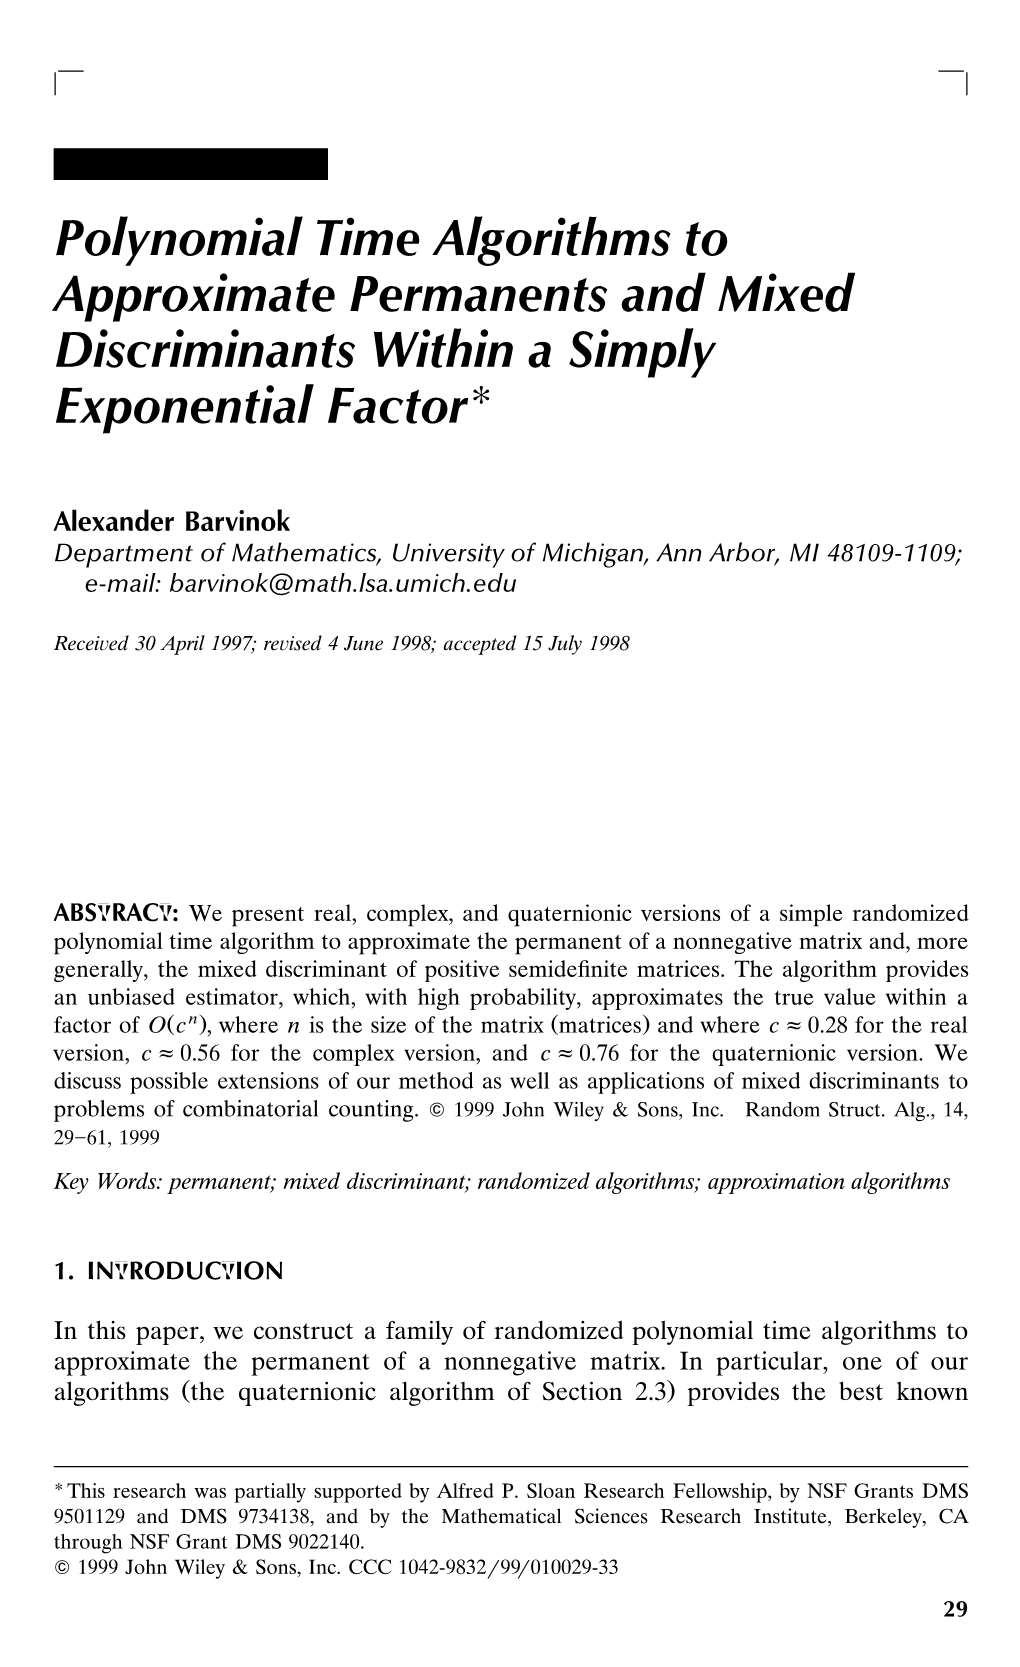 Polynomial Time Algorithms to Approximate Permanents and Mixed Discriminants Within a Simply Exponential Factoru